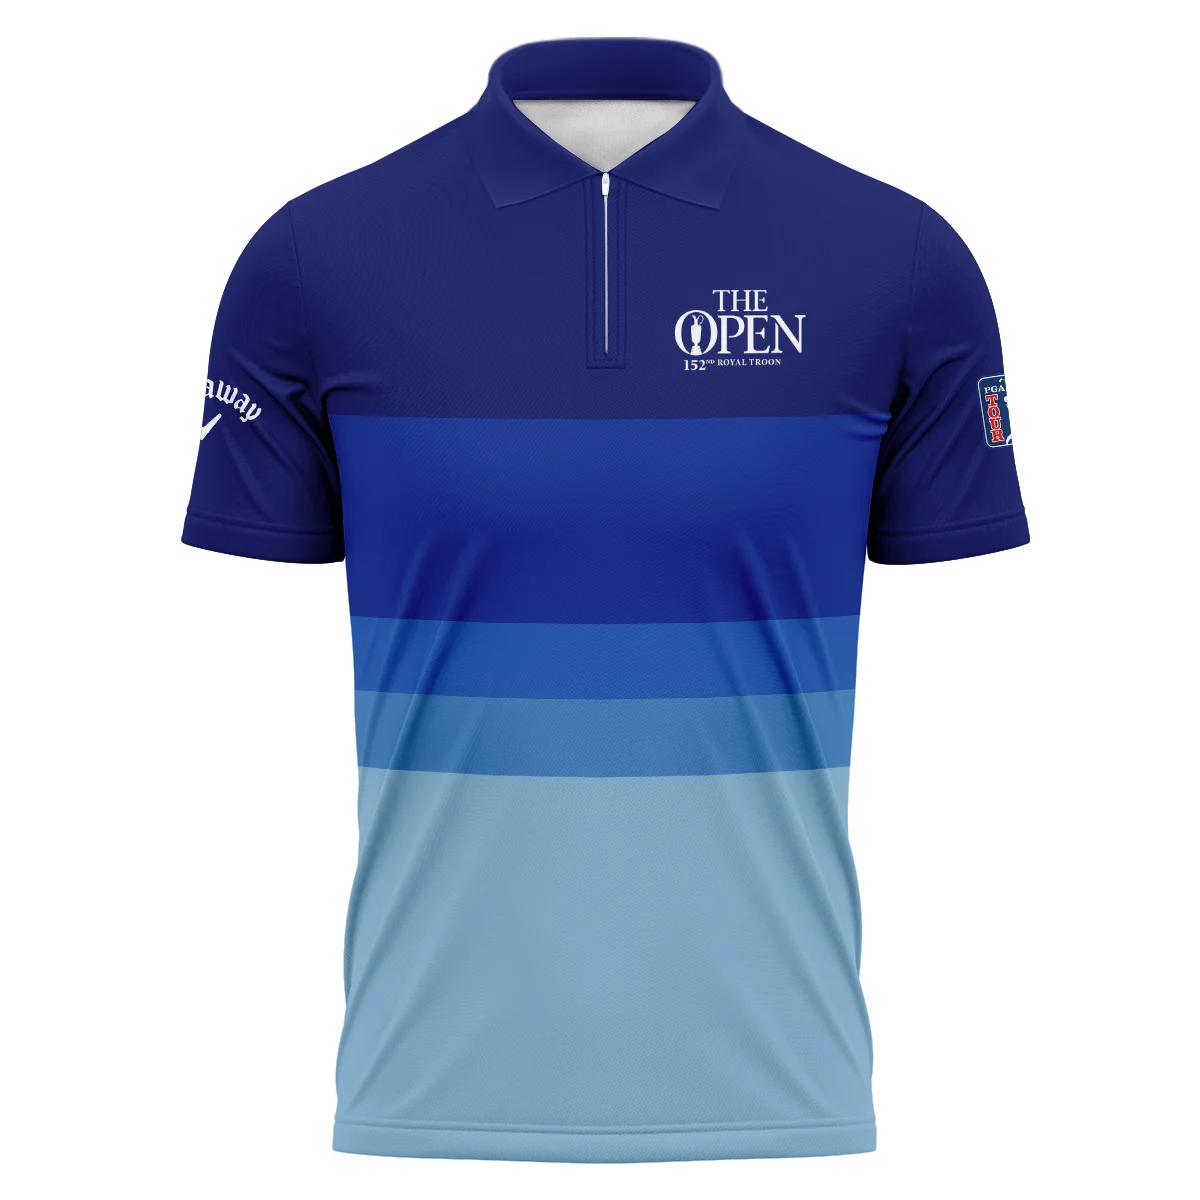 Blue Gradient Line Pattern Background Callaway 152nd Open Championship Quarter-Zip Jacket All Over Prints HOTOP270624A04CLWSWZ